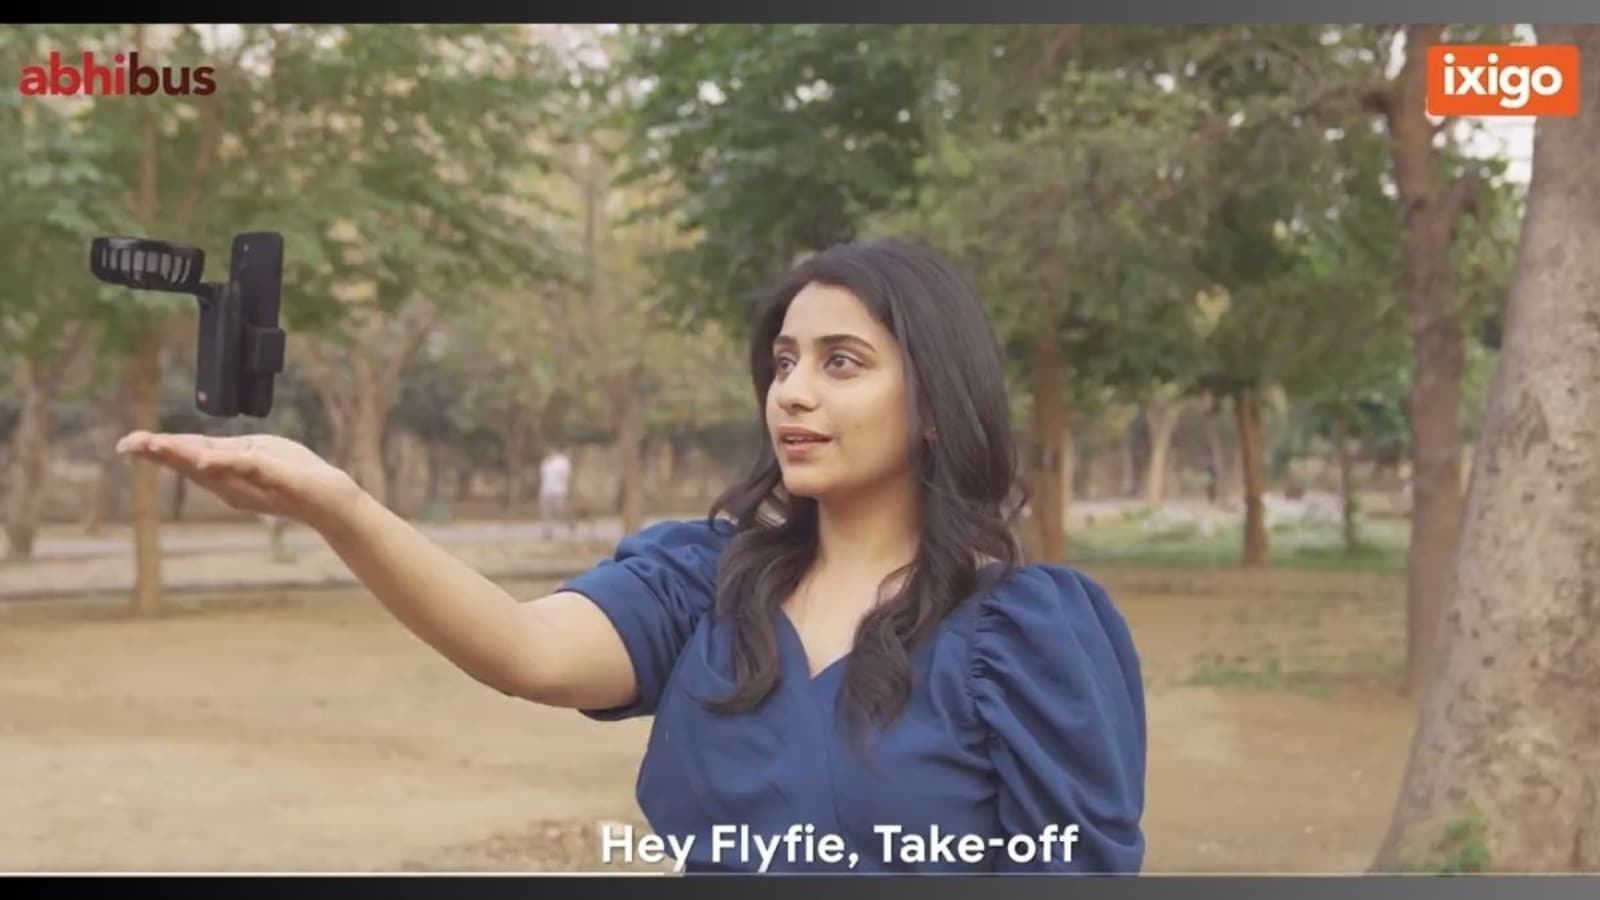 Ixigo launches ‘Flyfie’ drone selfie stick for travellers however you can not acquire it